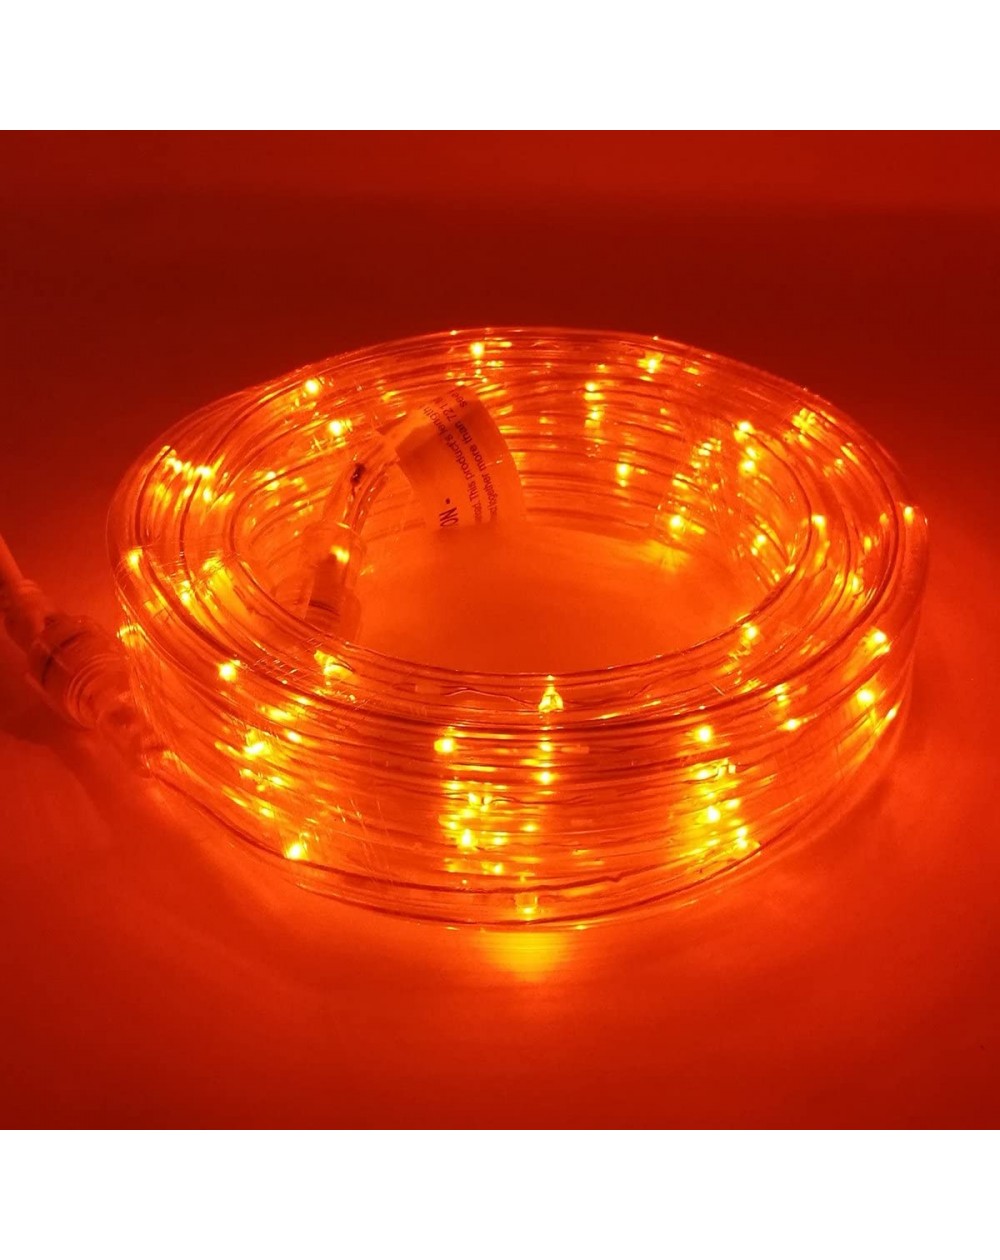 Outdoor String Lights UL Certified 16 Feet 80 LED Clear Rope Tube Lights Indoor Outdoor Waterproof IP65 Holiday Christmas Par...